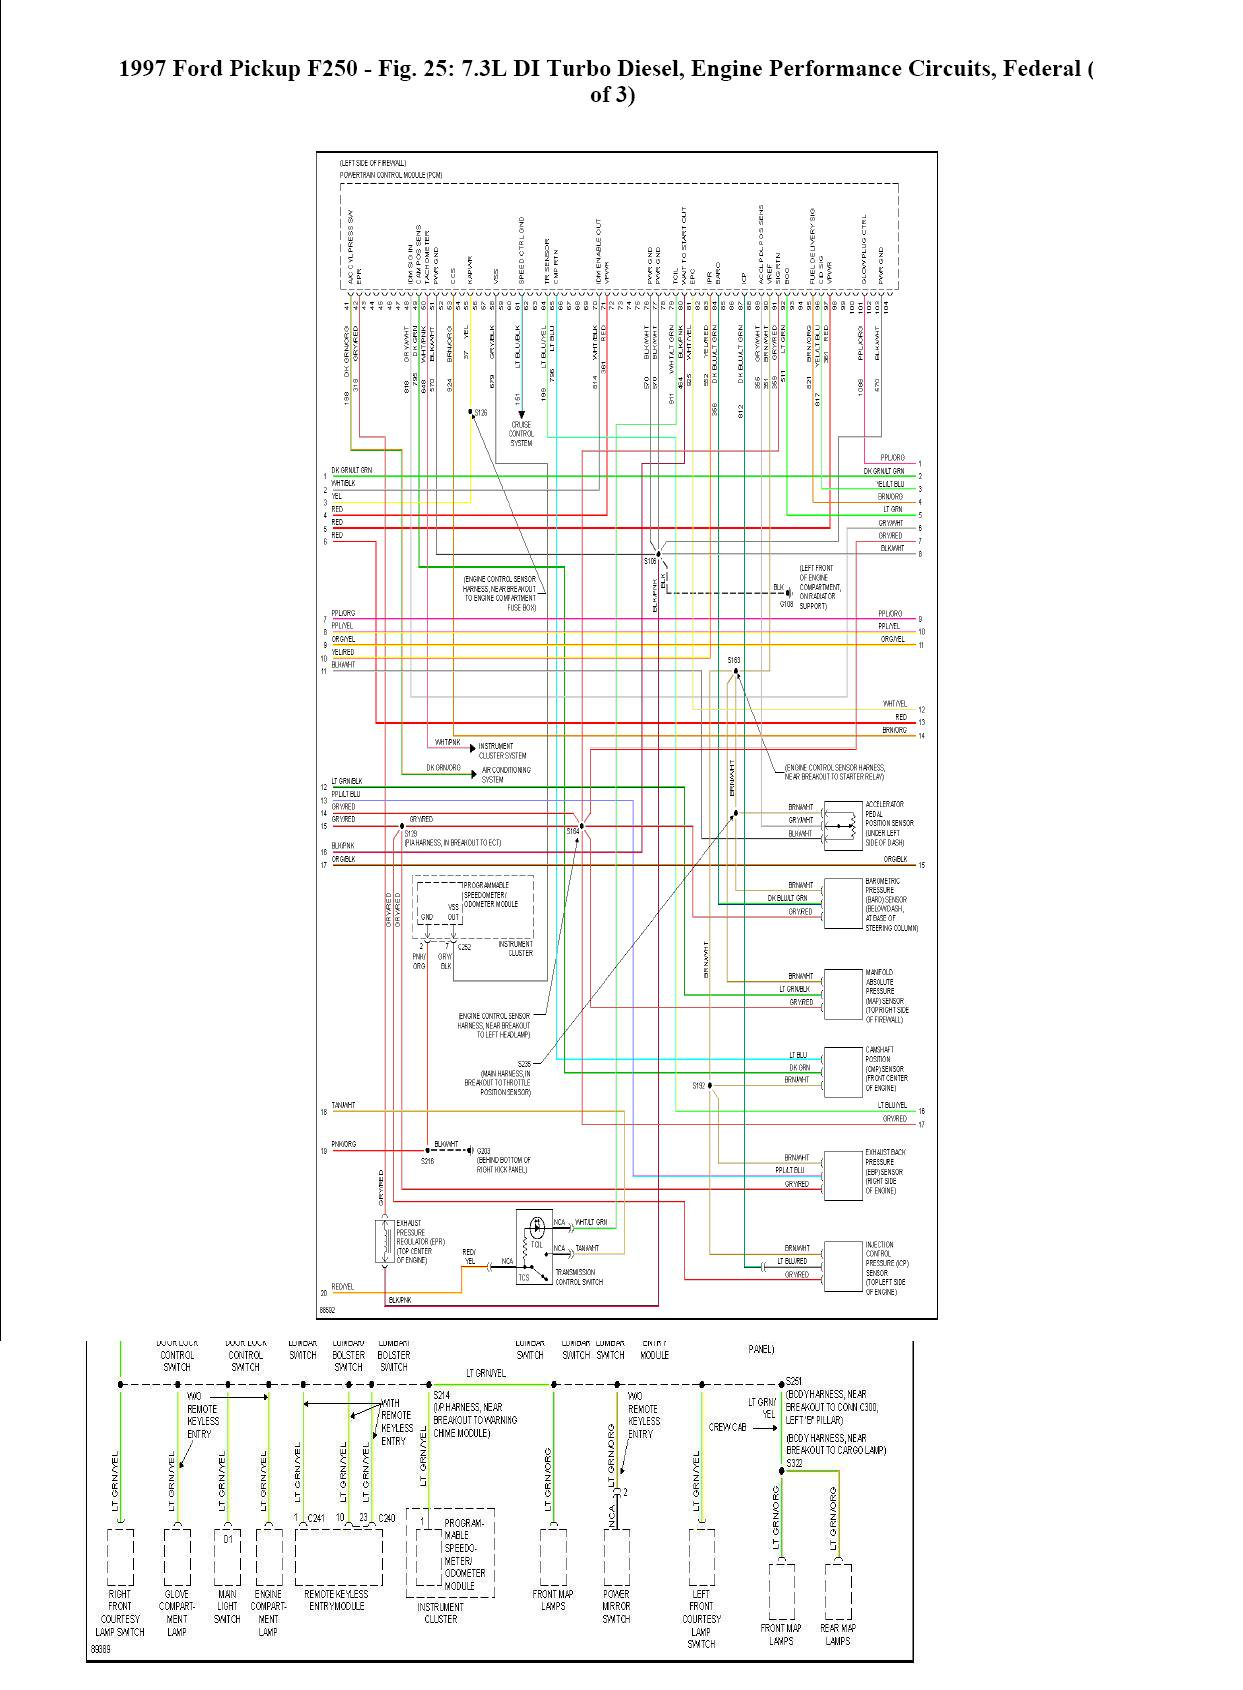 Where Can I Find A Complete Wiring Schematic For A 1997 Ford F350 - 7.3 Powerstroke Wiring Diagram